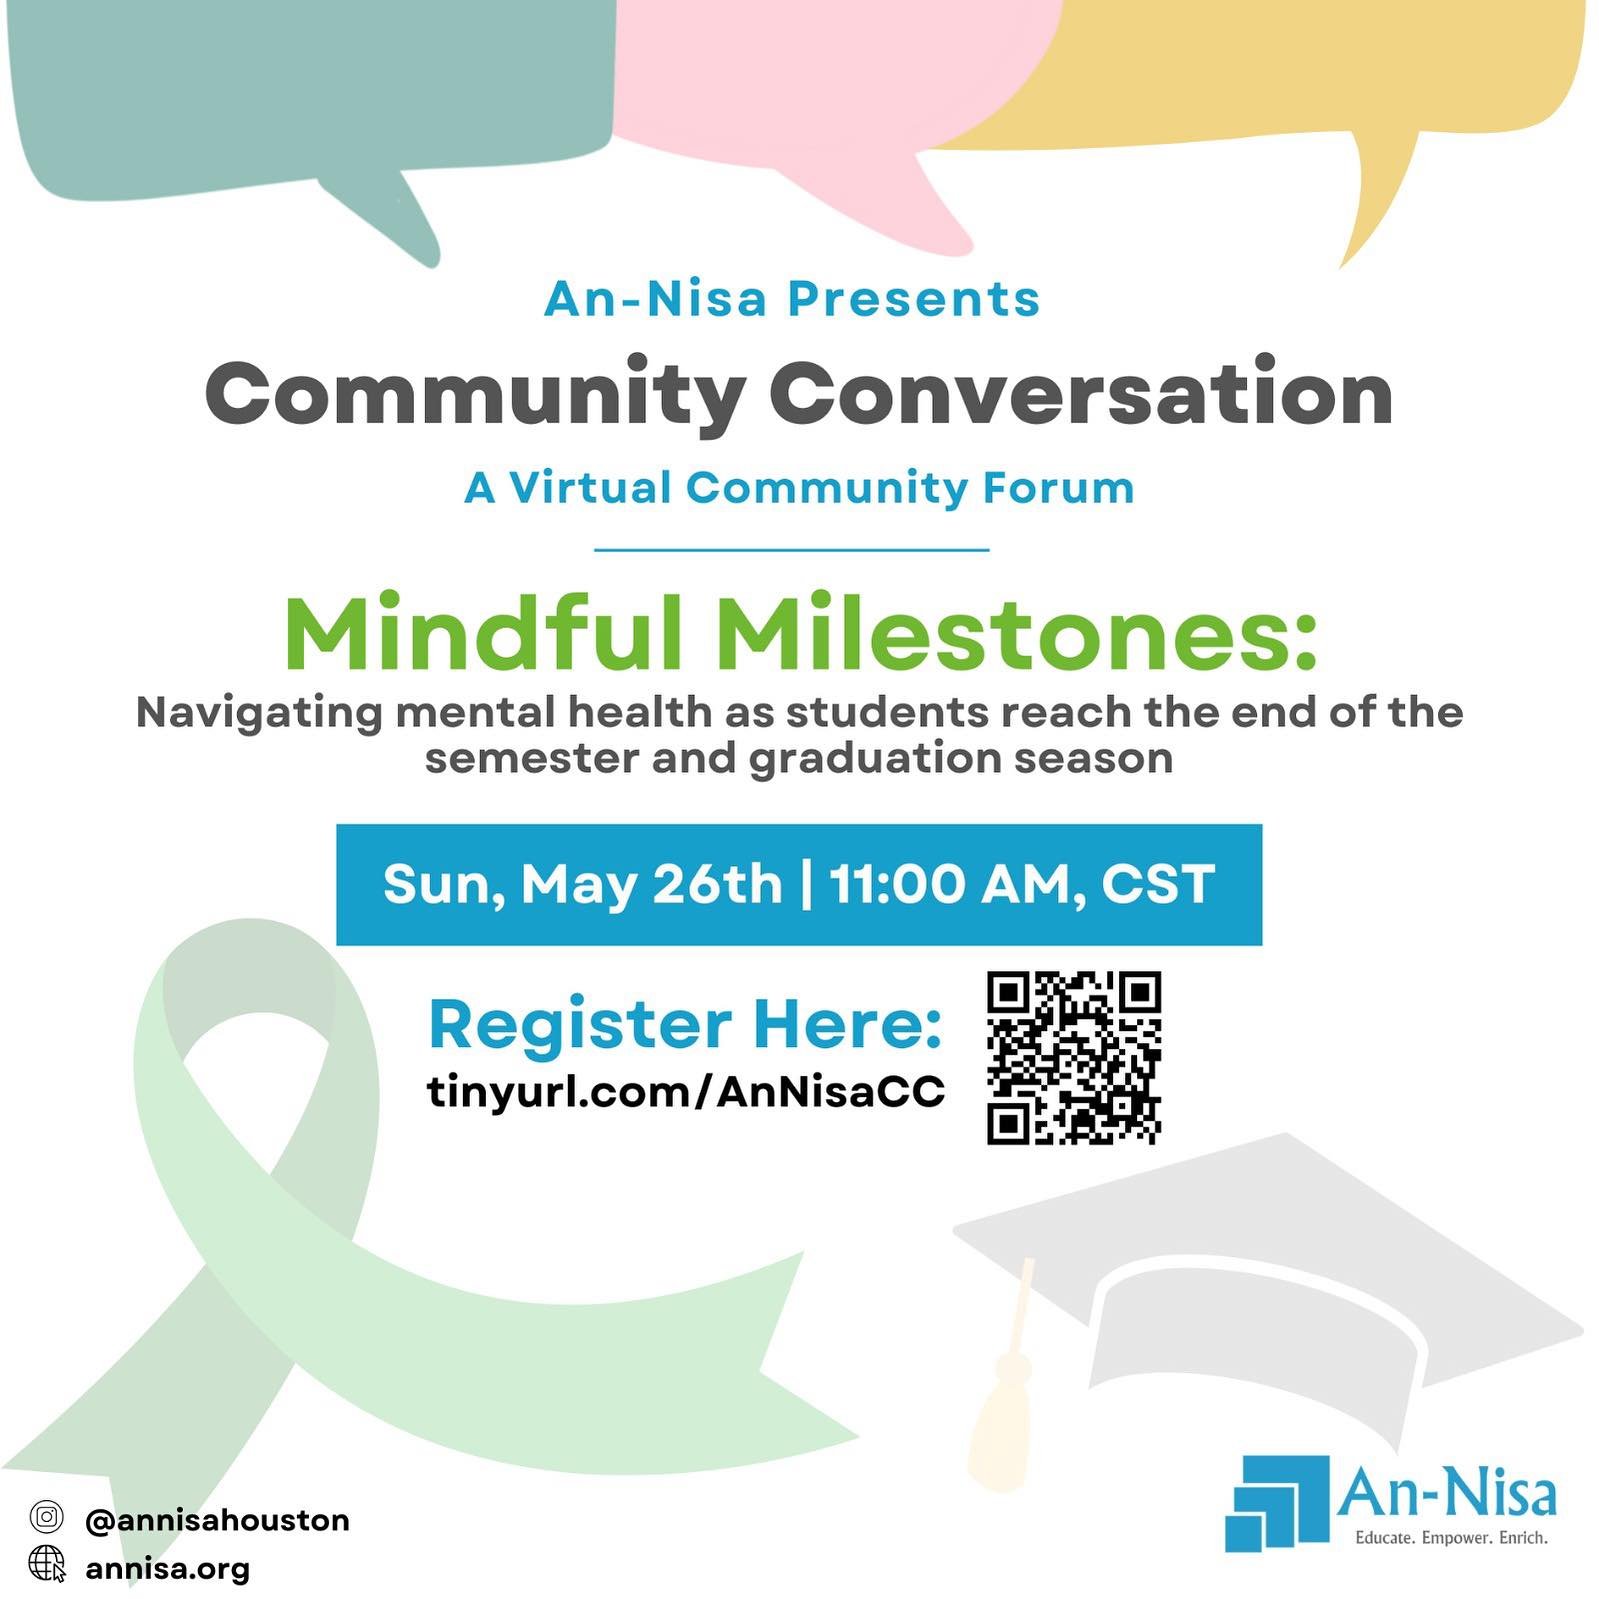 Join us for a thoughtful community discussion tailored specifically for students approaching the end of the semester and graduation season. Our event, &ldquo;Mindful Milestones,&rdquo; aims to provide valuable insights and practical tips for navigati